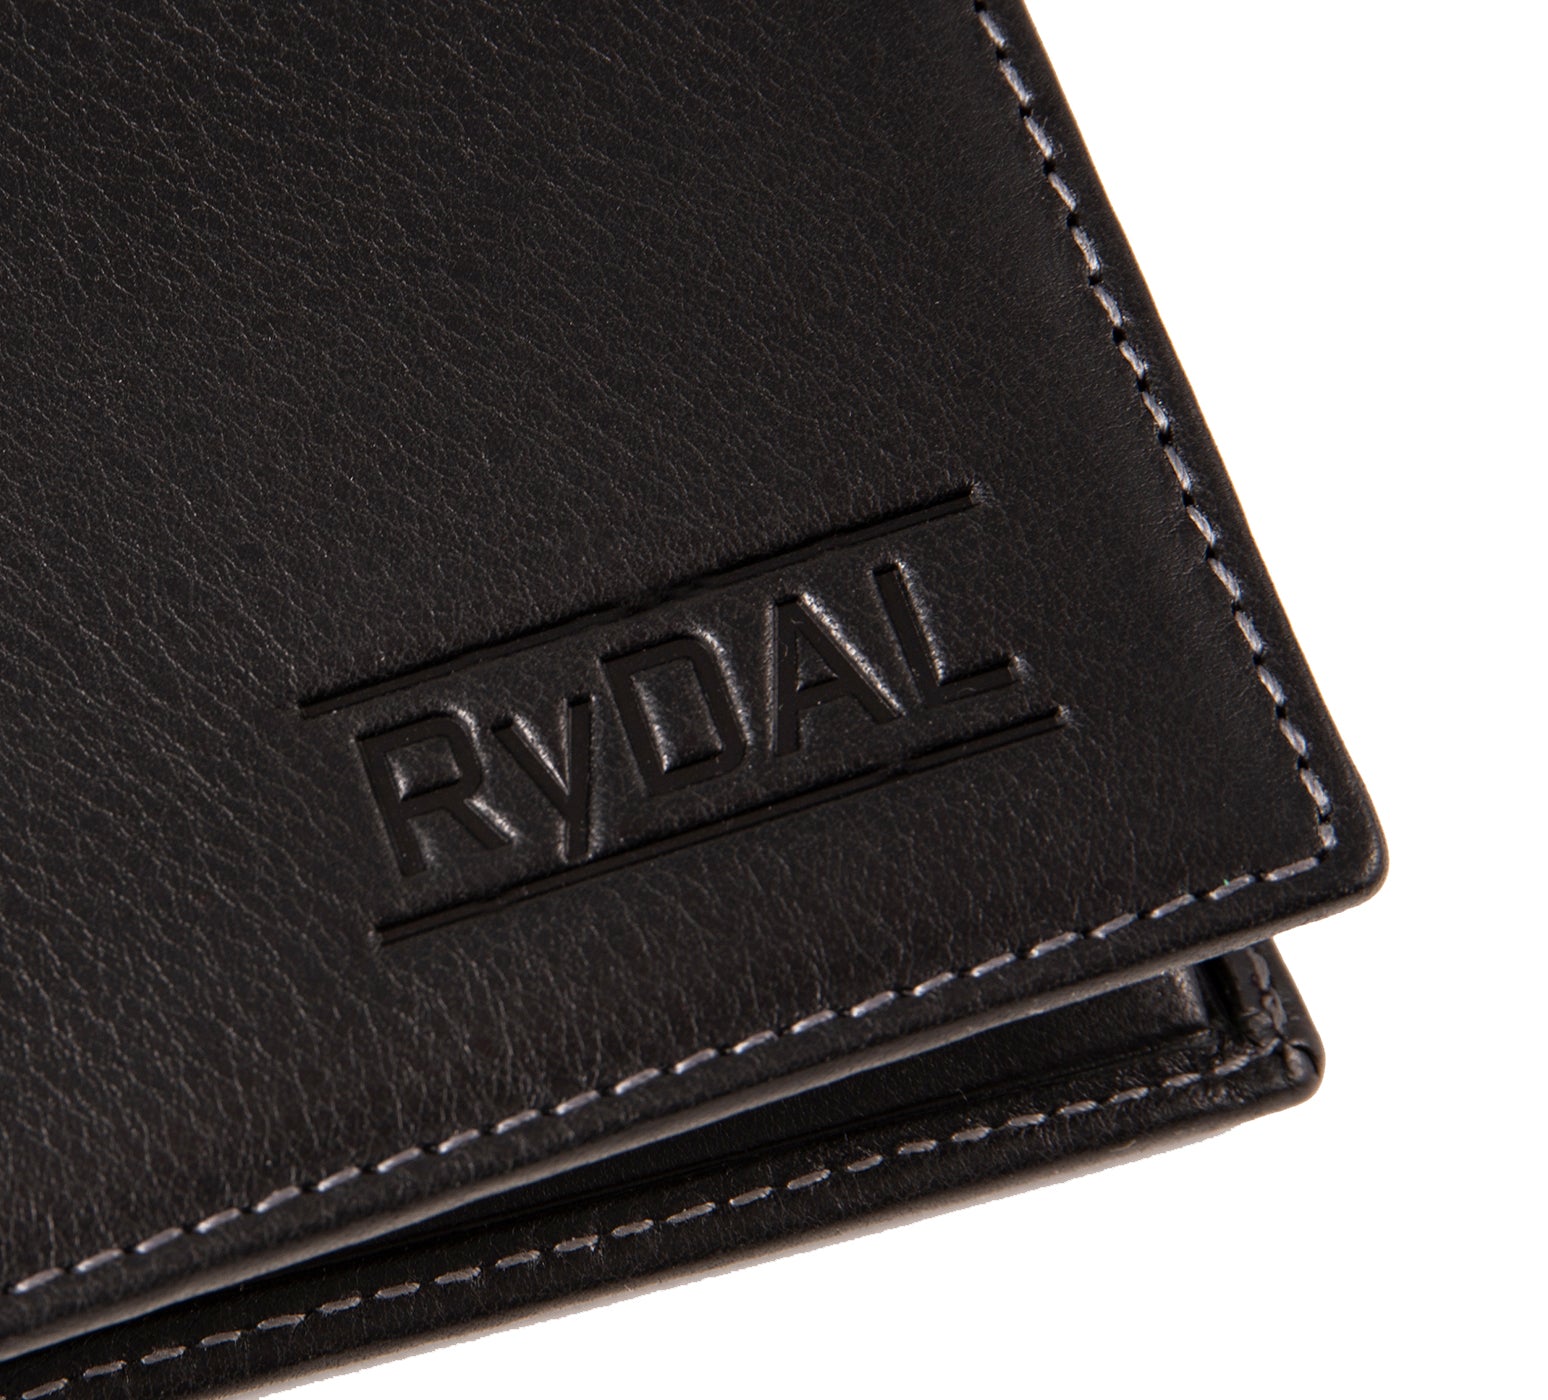 Mens Leather Wallet with Coin Pocket from Rydal in 'Black' showing close up of logo.